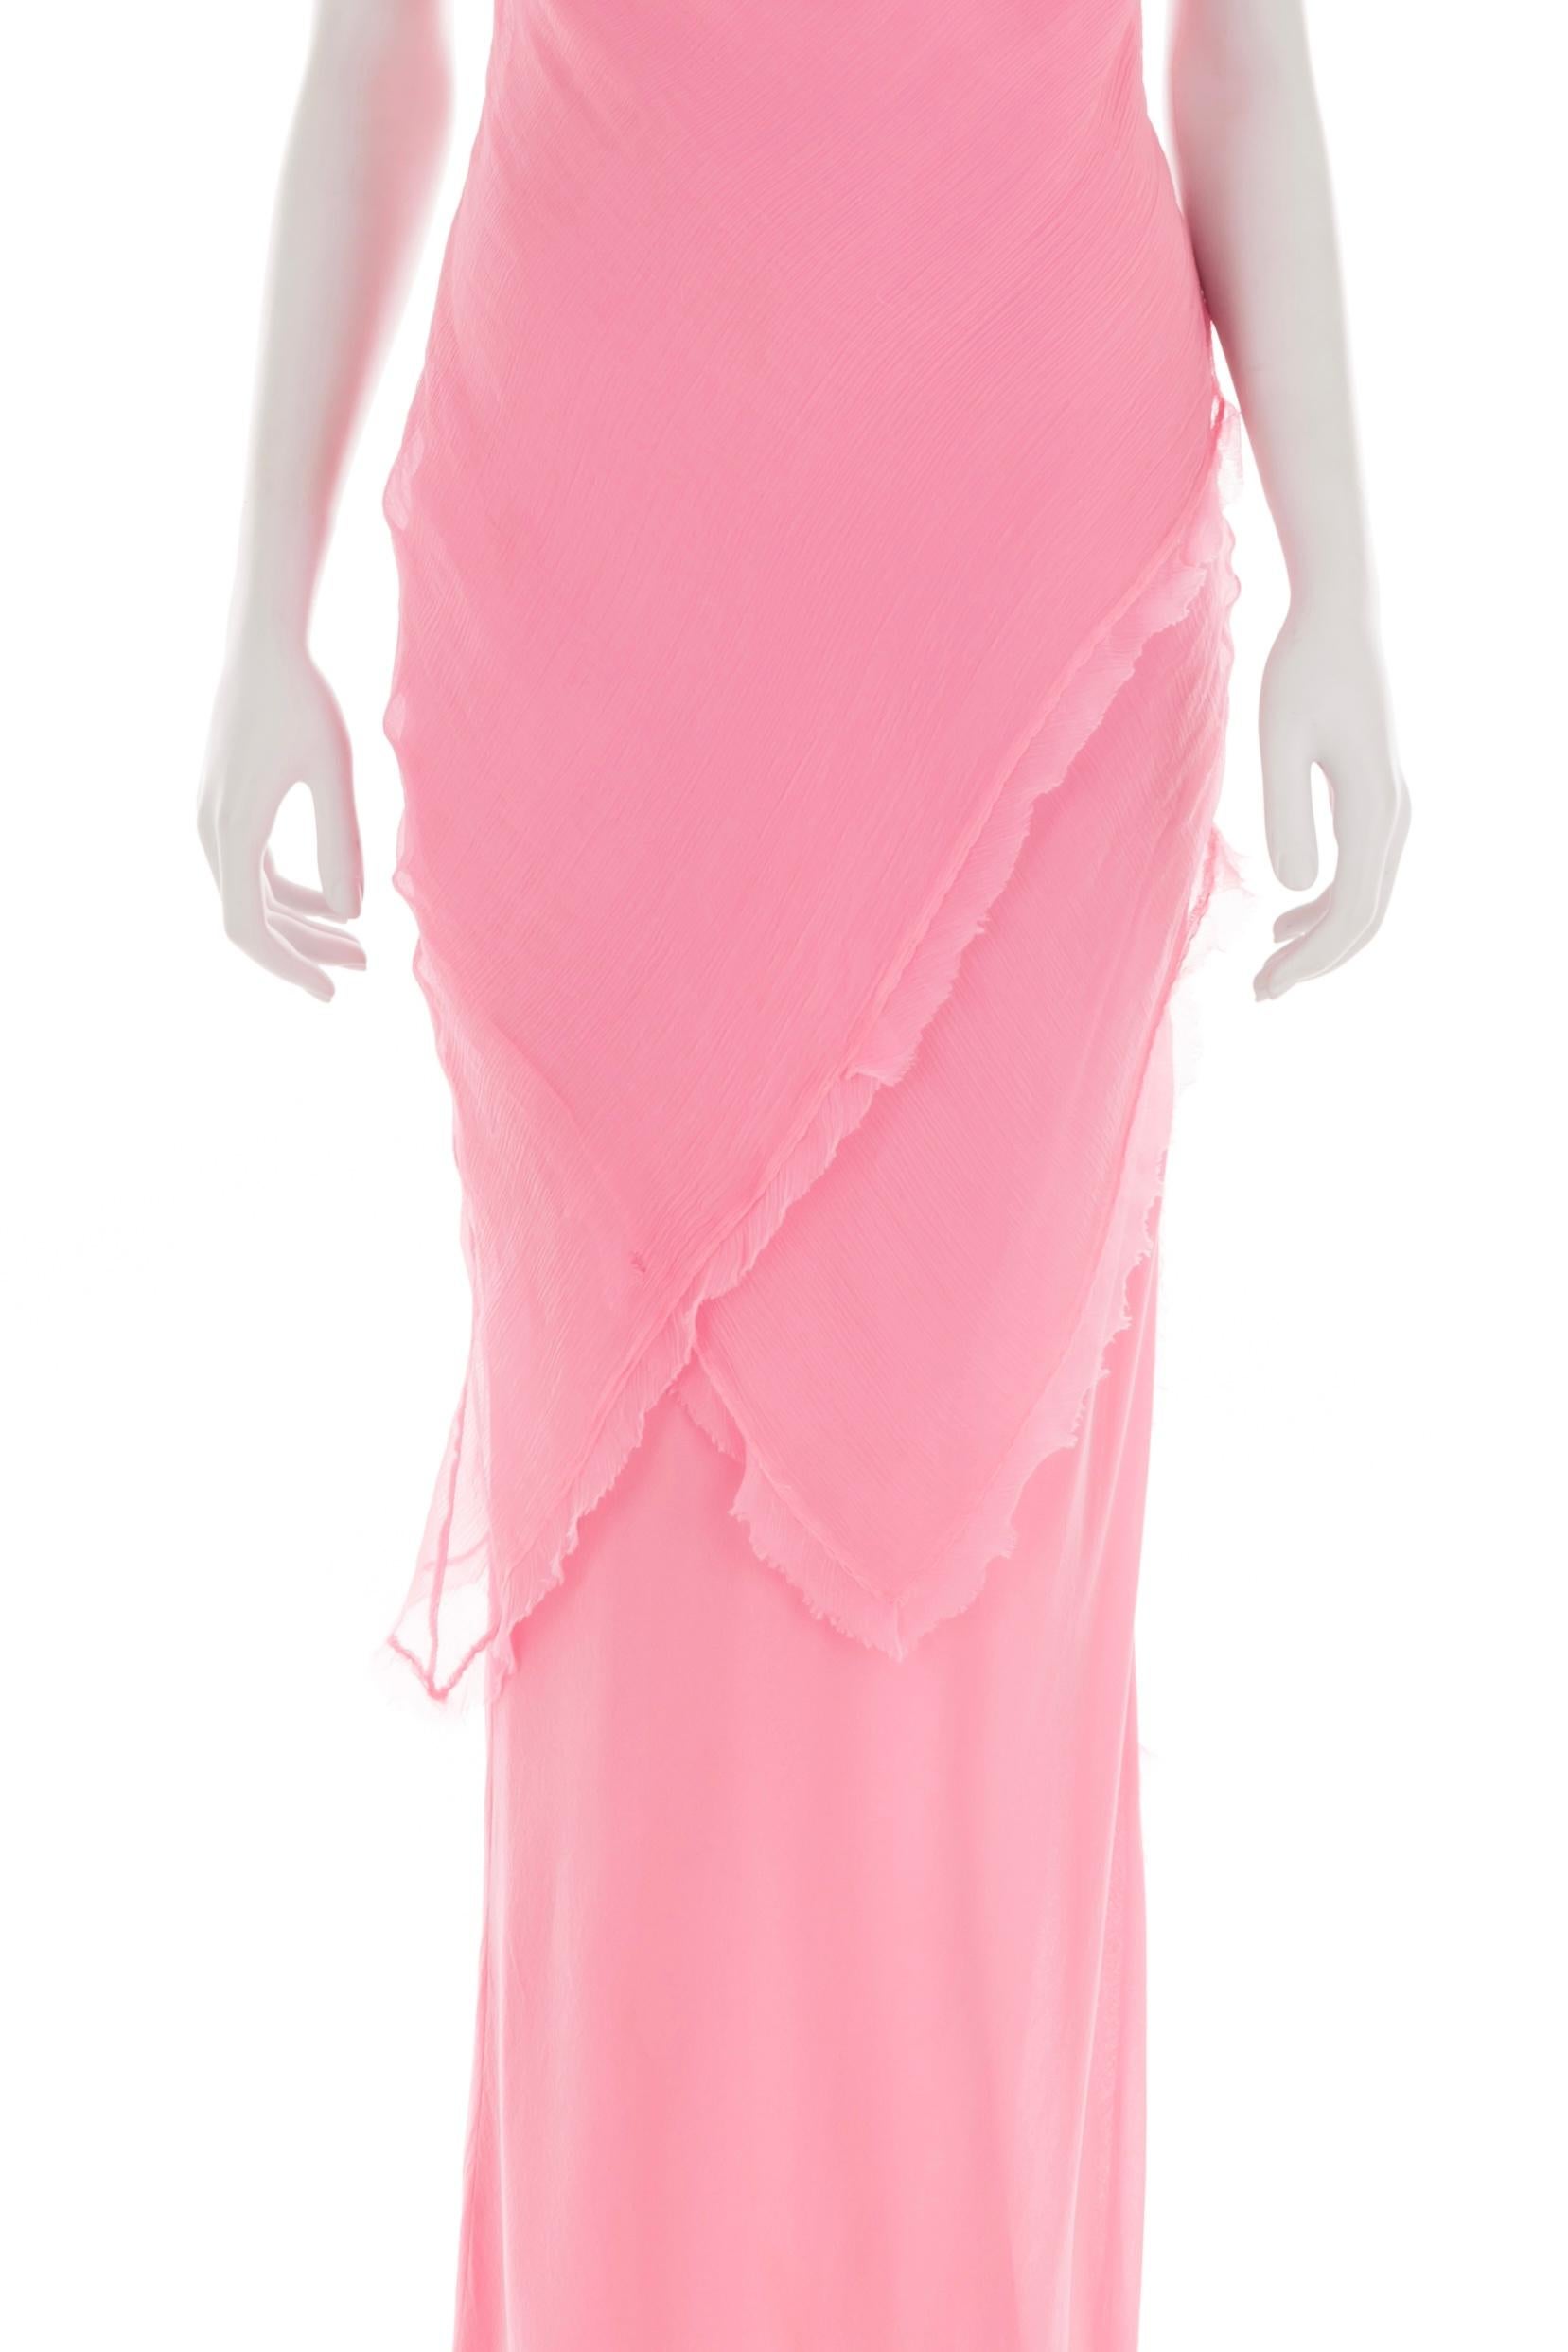 Ermanno Scervino S/S 2004 multi-layered pink chiffon gown with side slit In Good Condition For Sale In Rome, IT